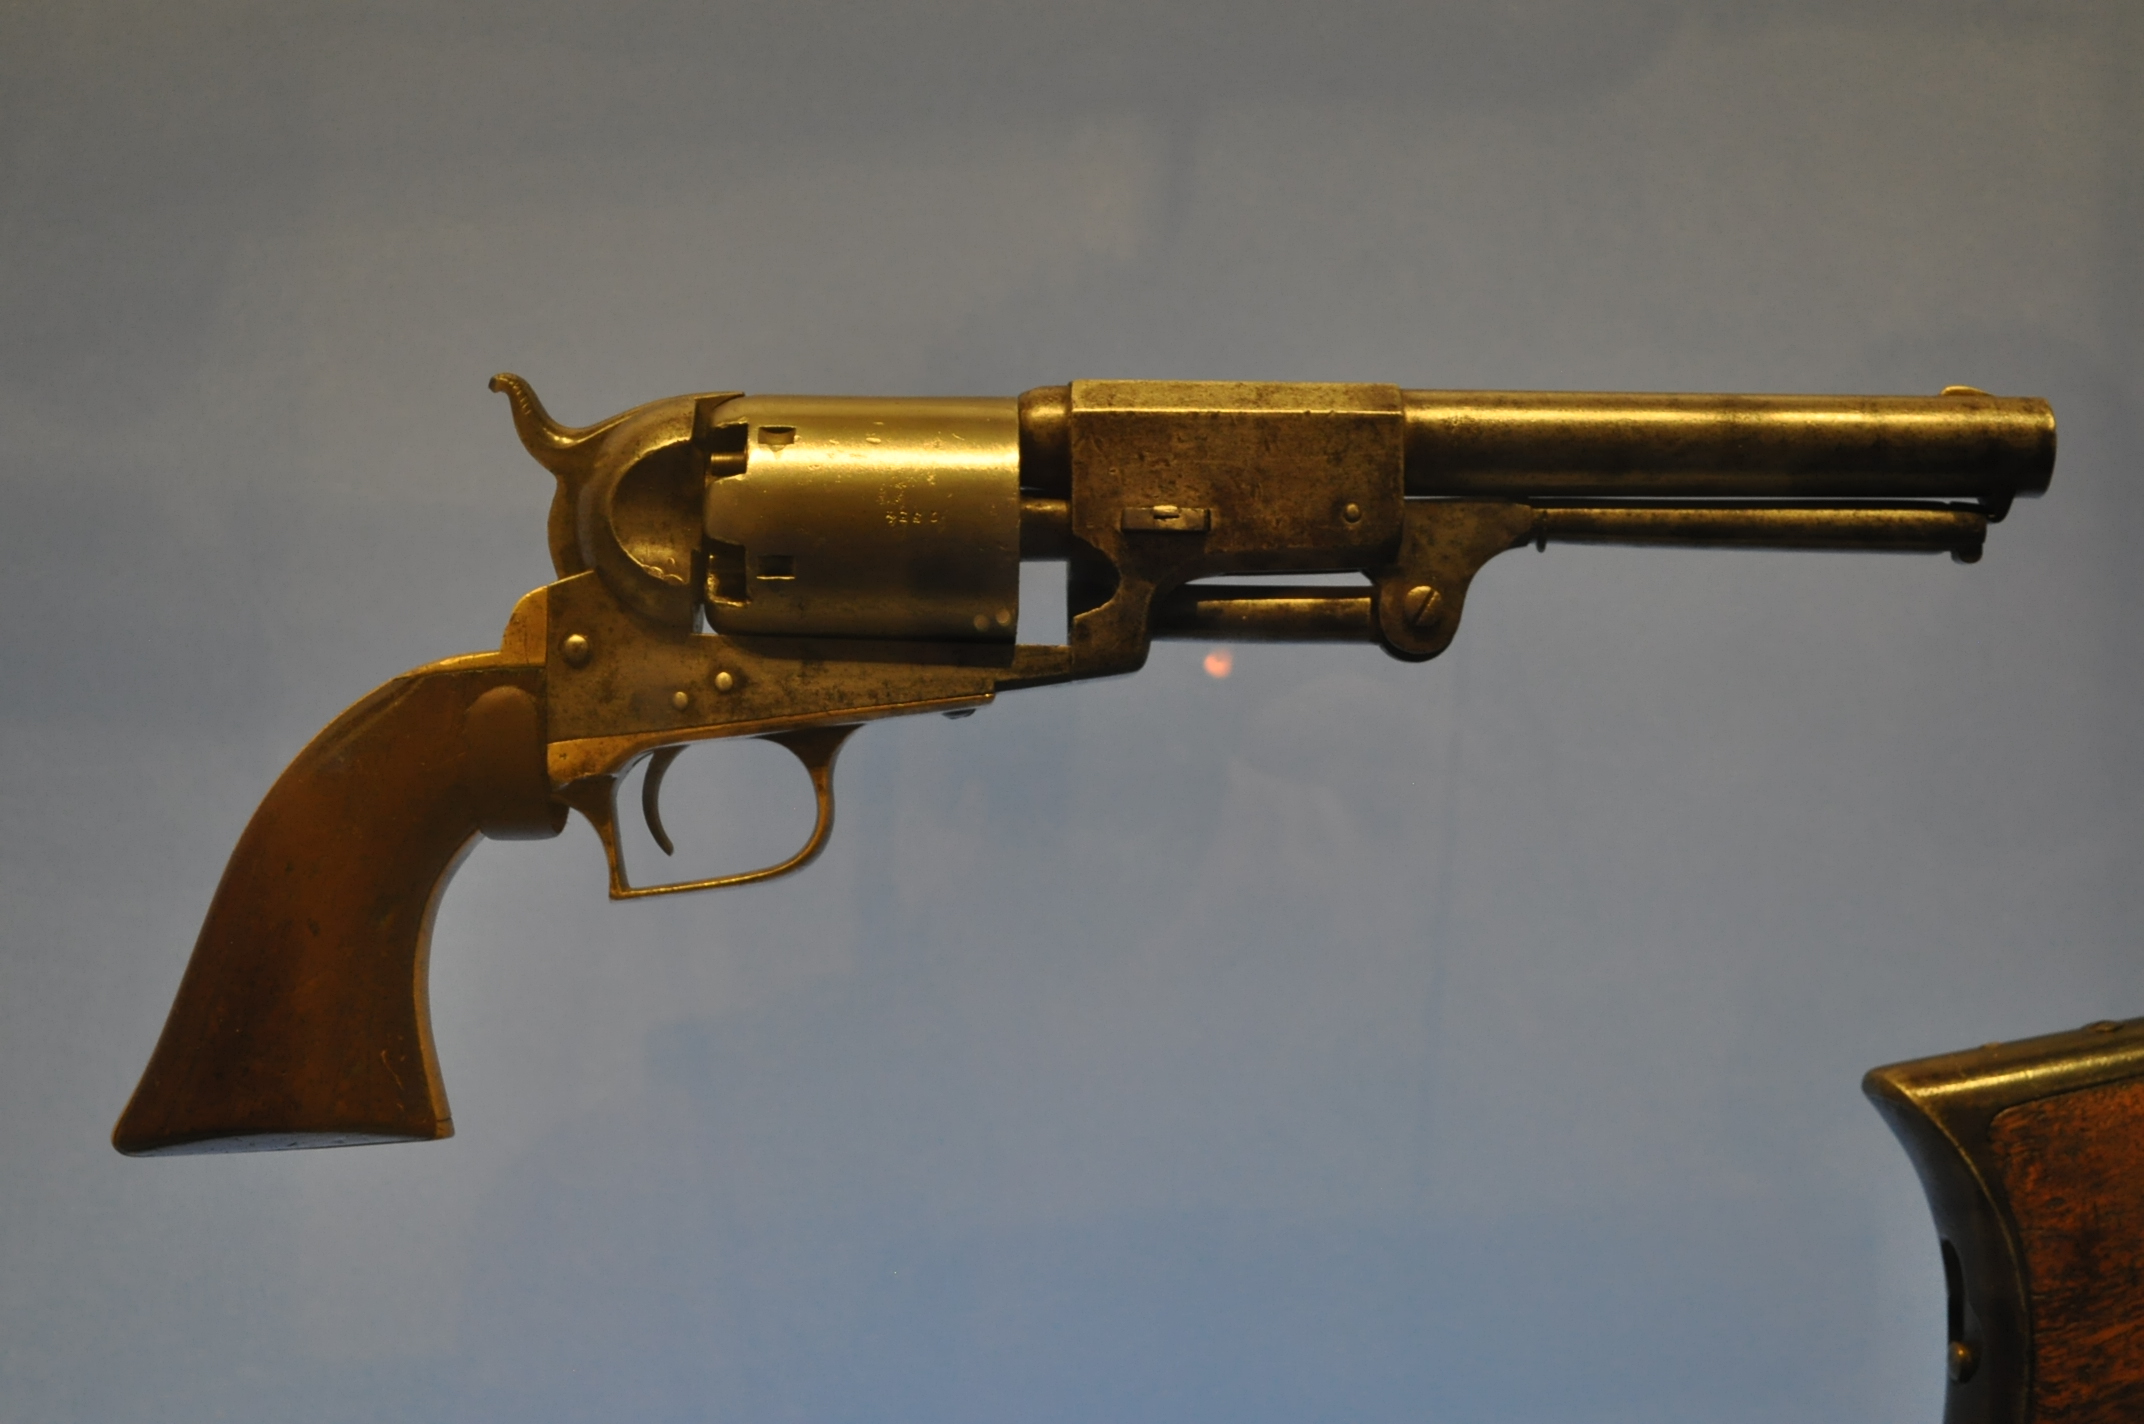 an antique revolver on display with the sights pointing towards it